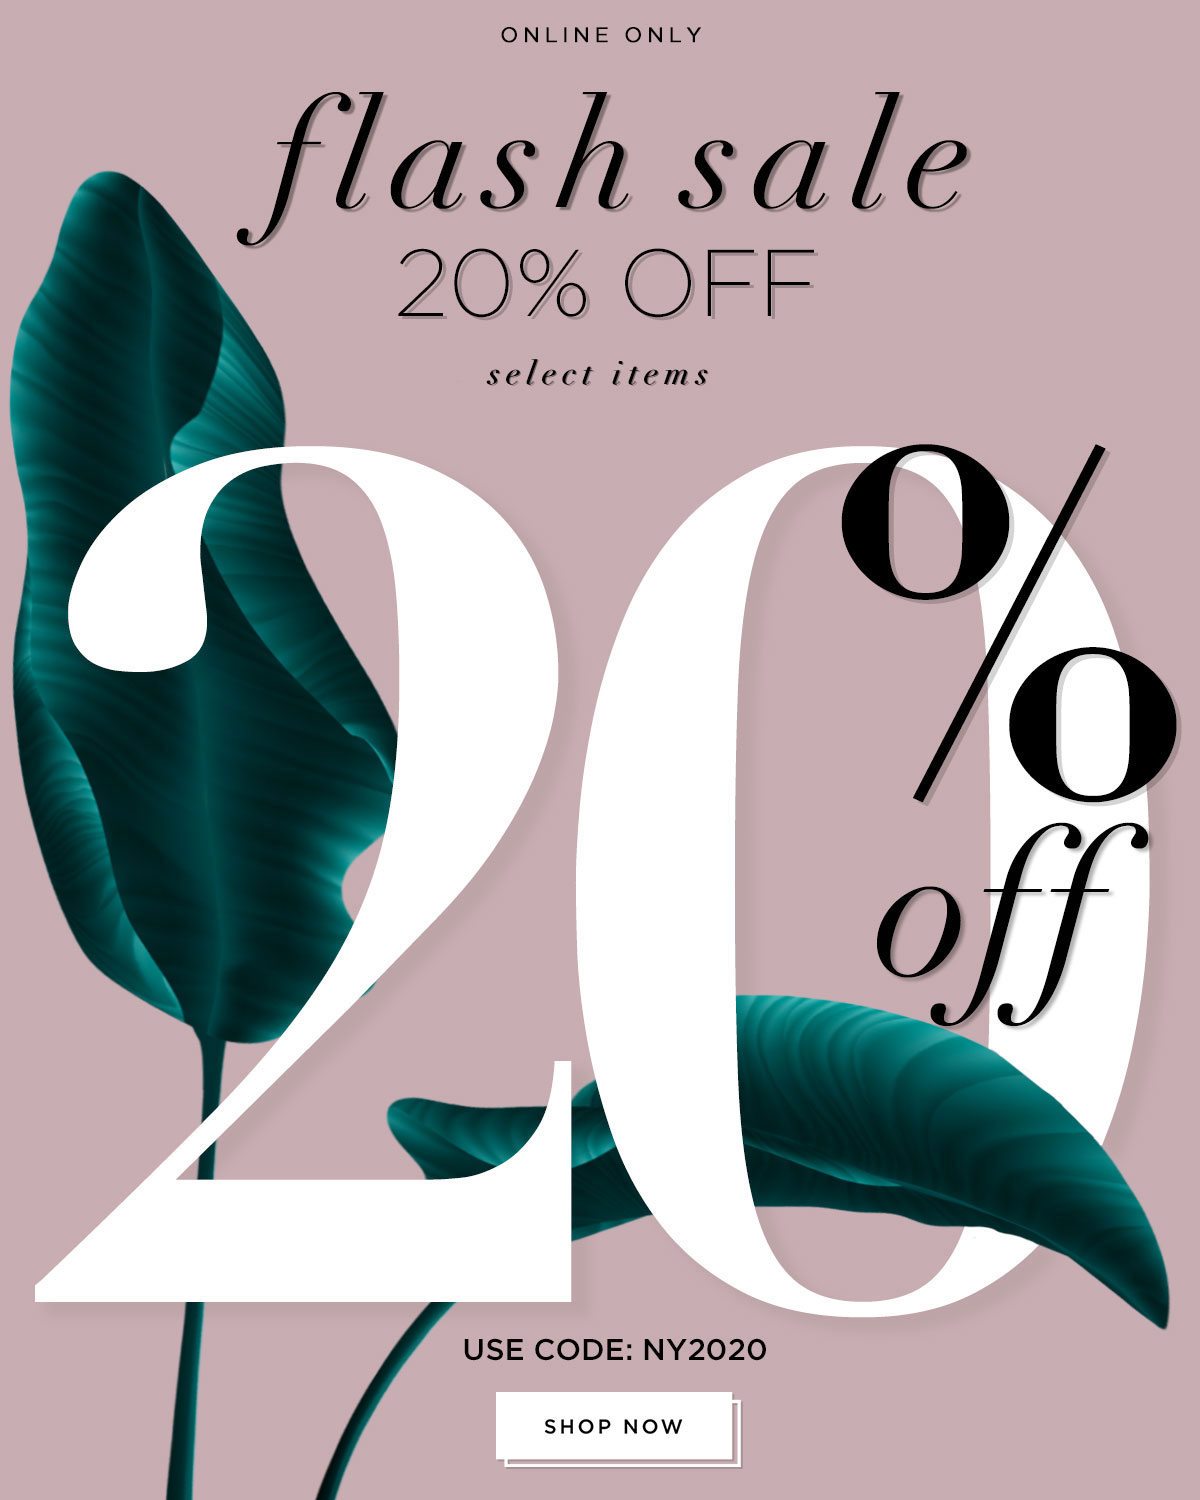 Flash Sale - 20% off - Select items - Online Only - Use Code: NY2020 - Shop Now 